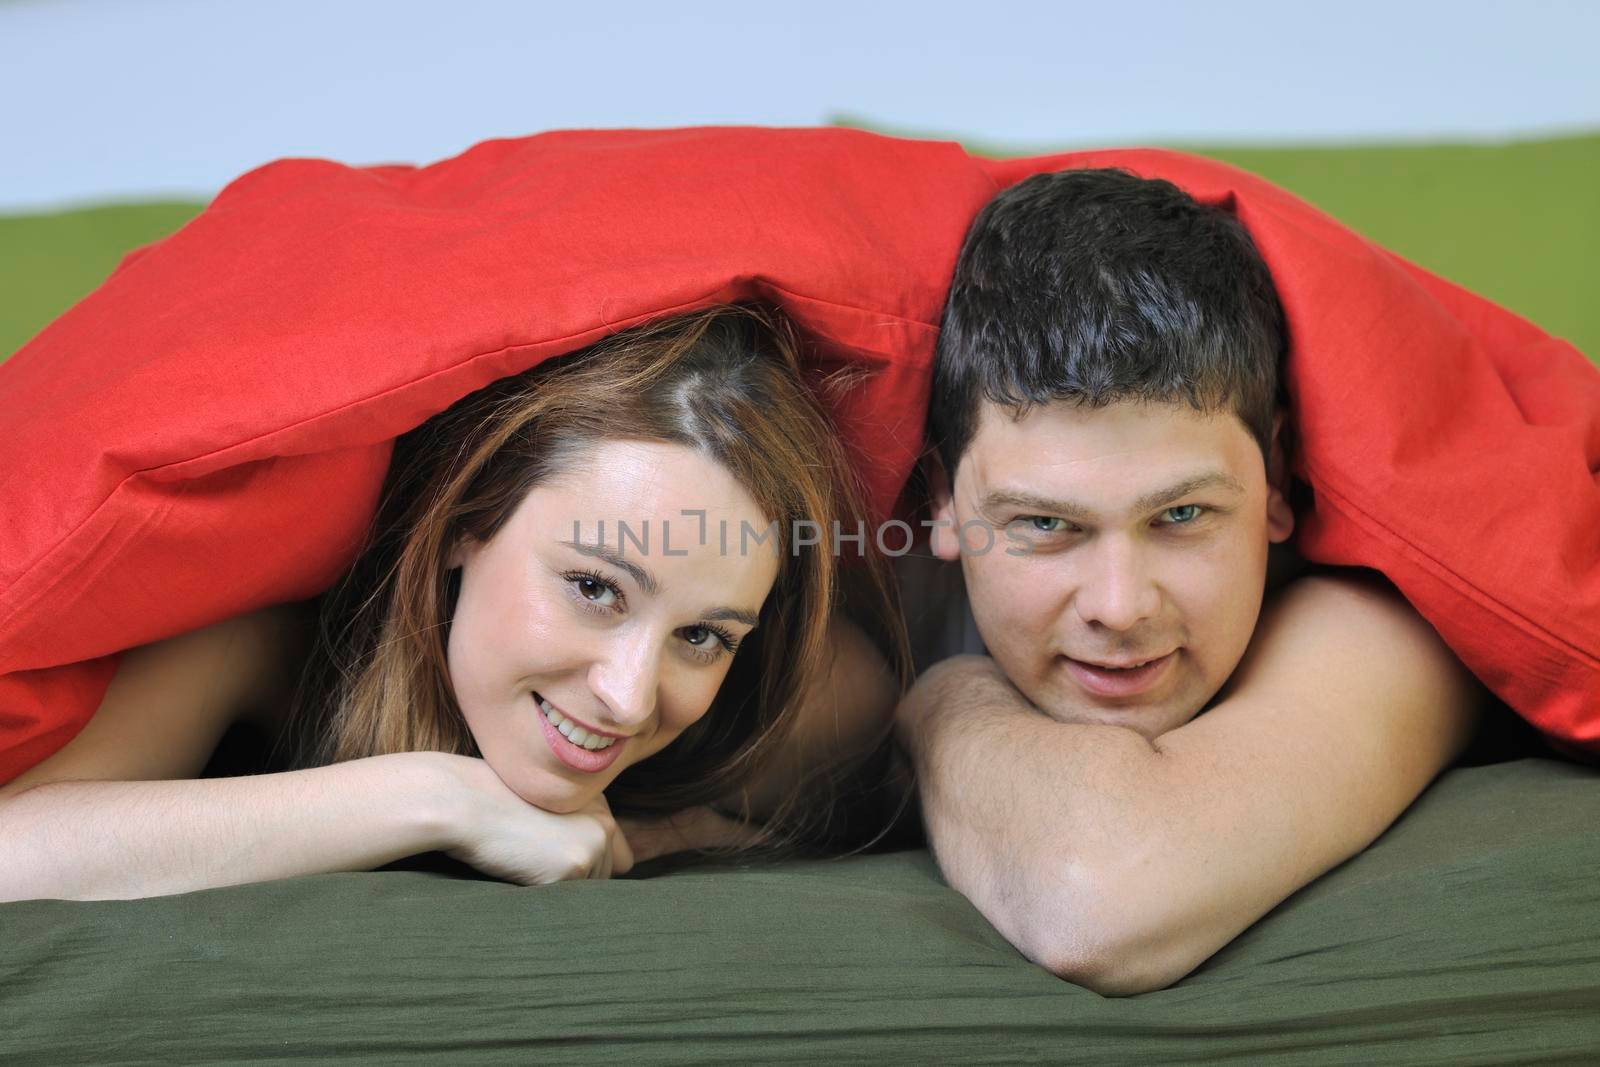 happy young couple in bed at morning